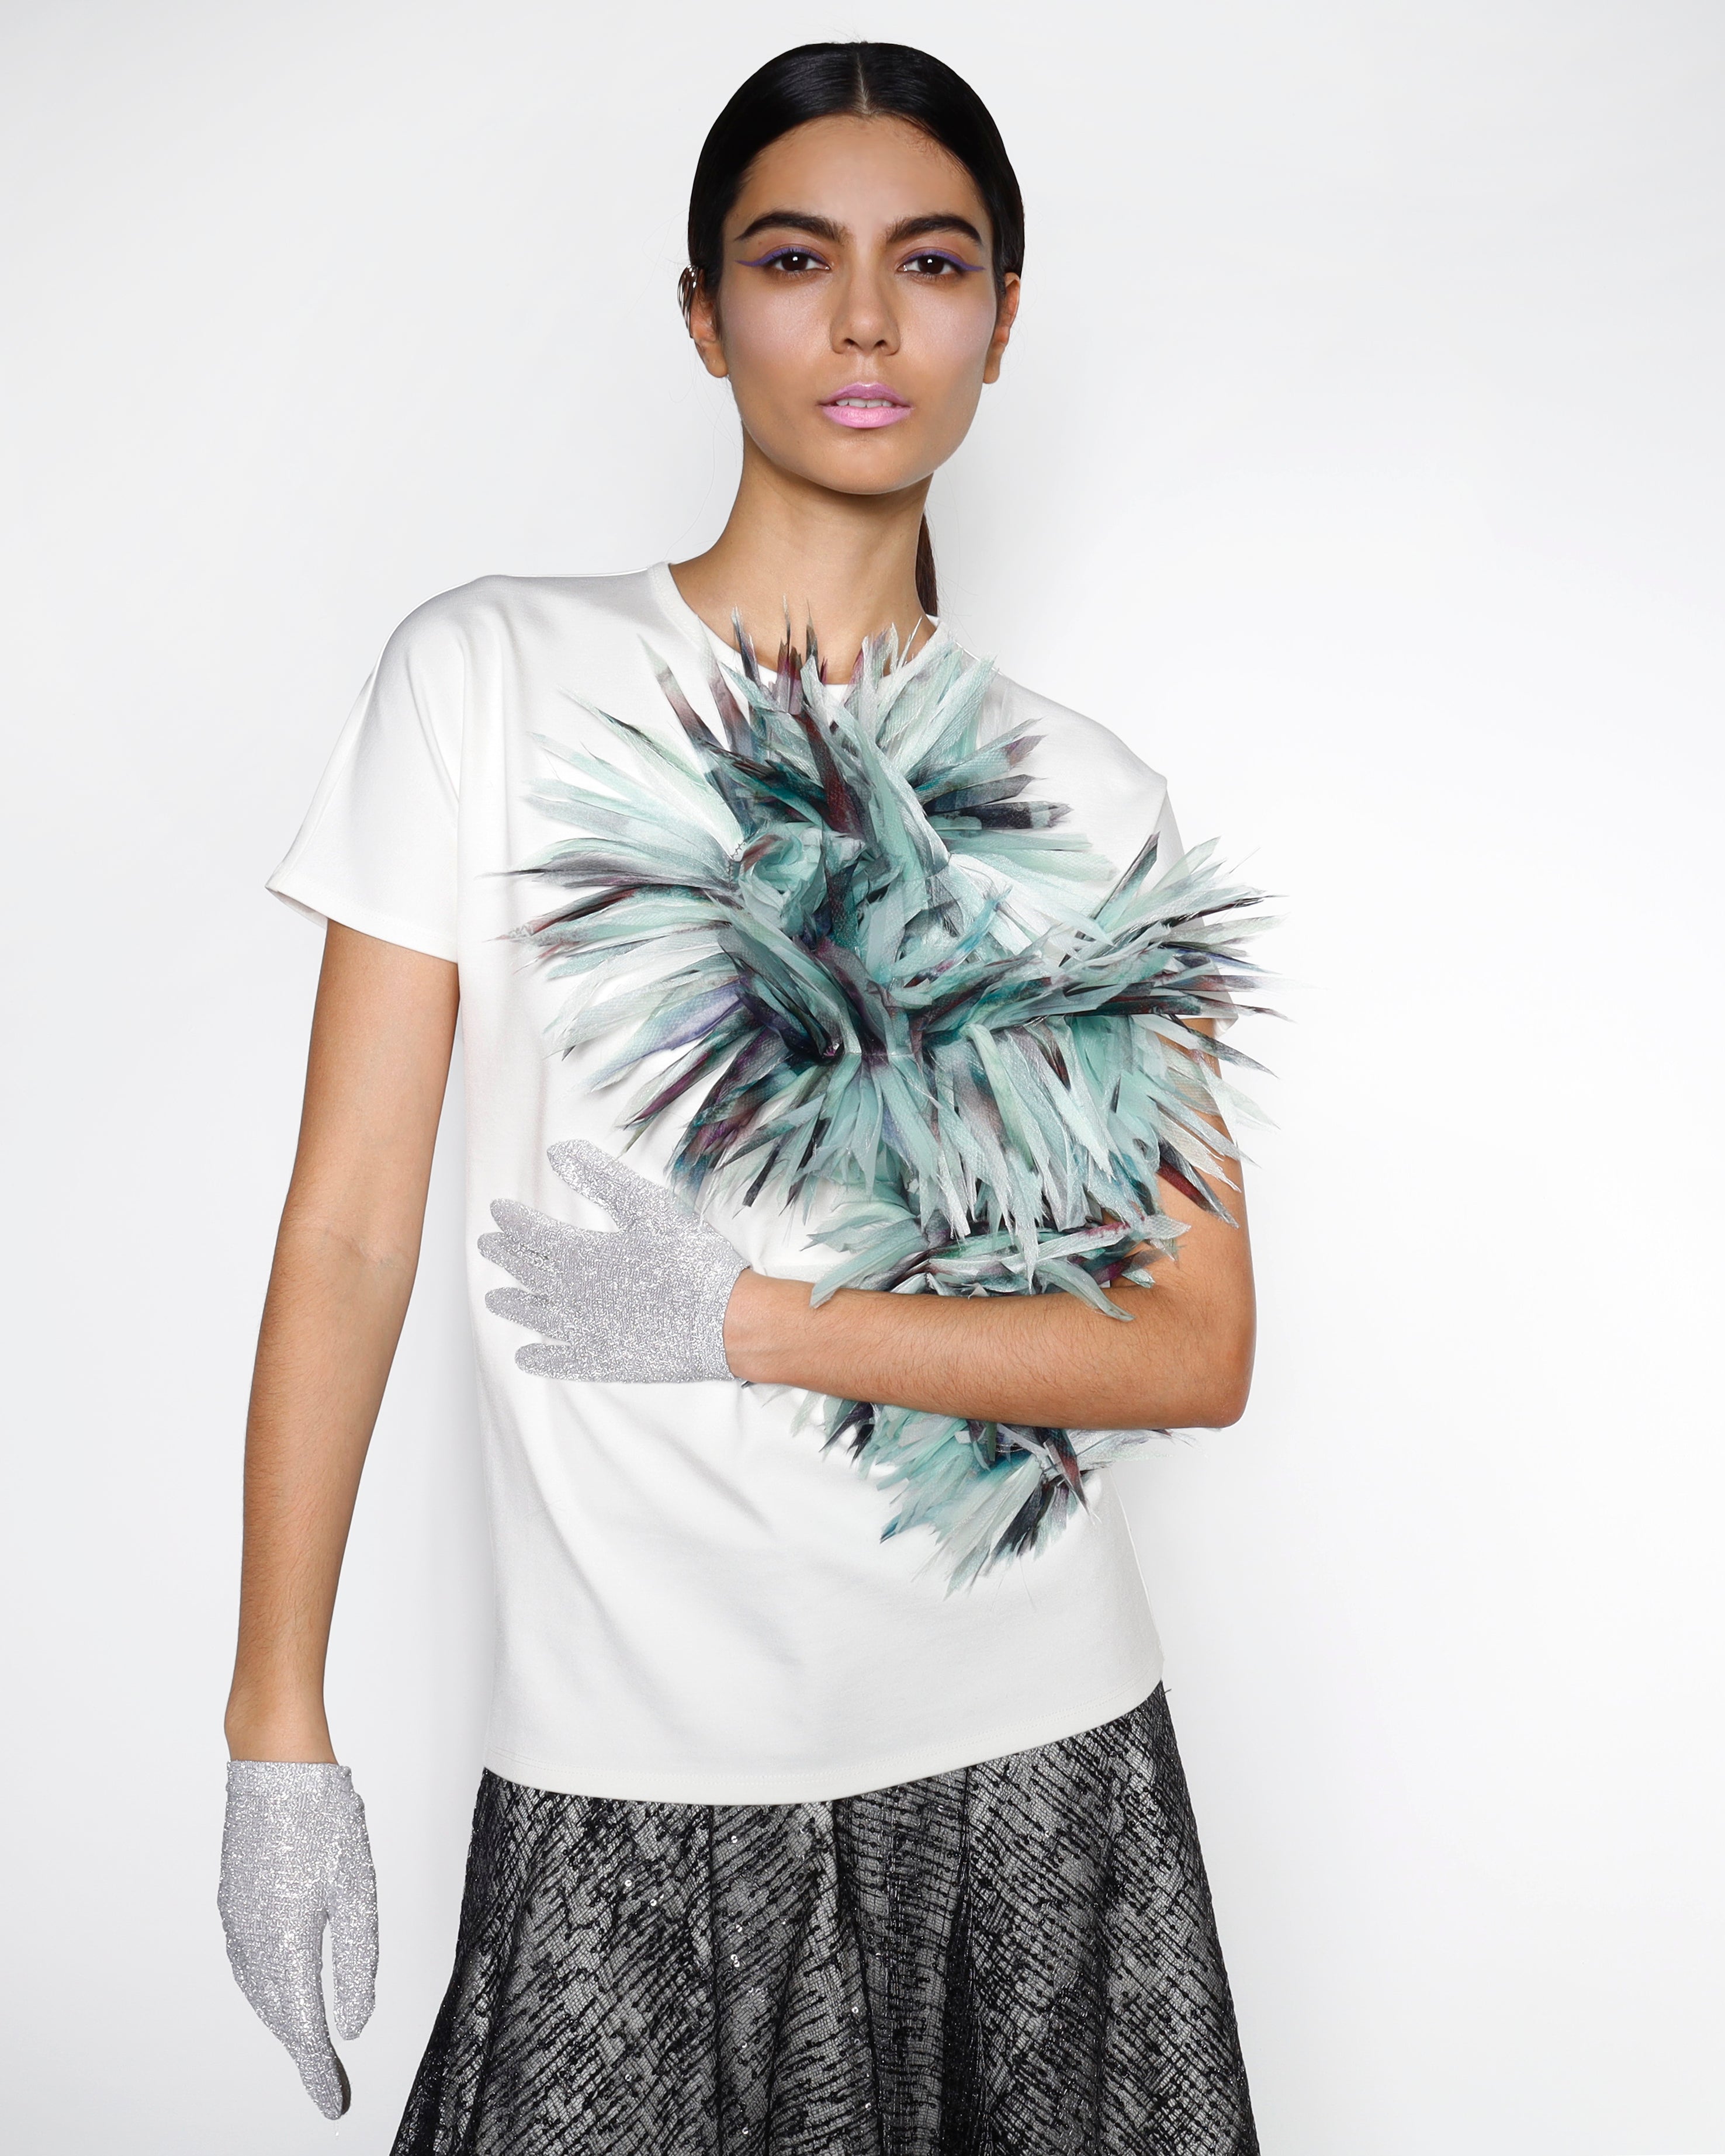 Maison Marie Saint Pierre | Top | Christiano | White | Green Faded Print